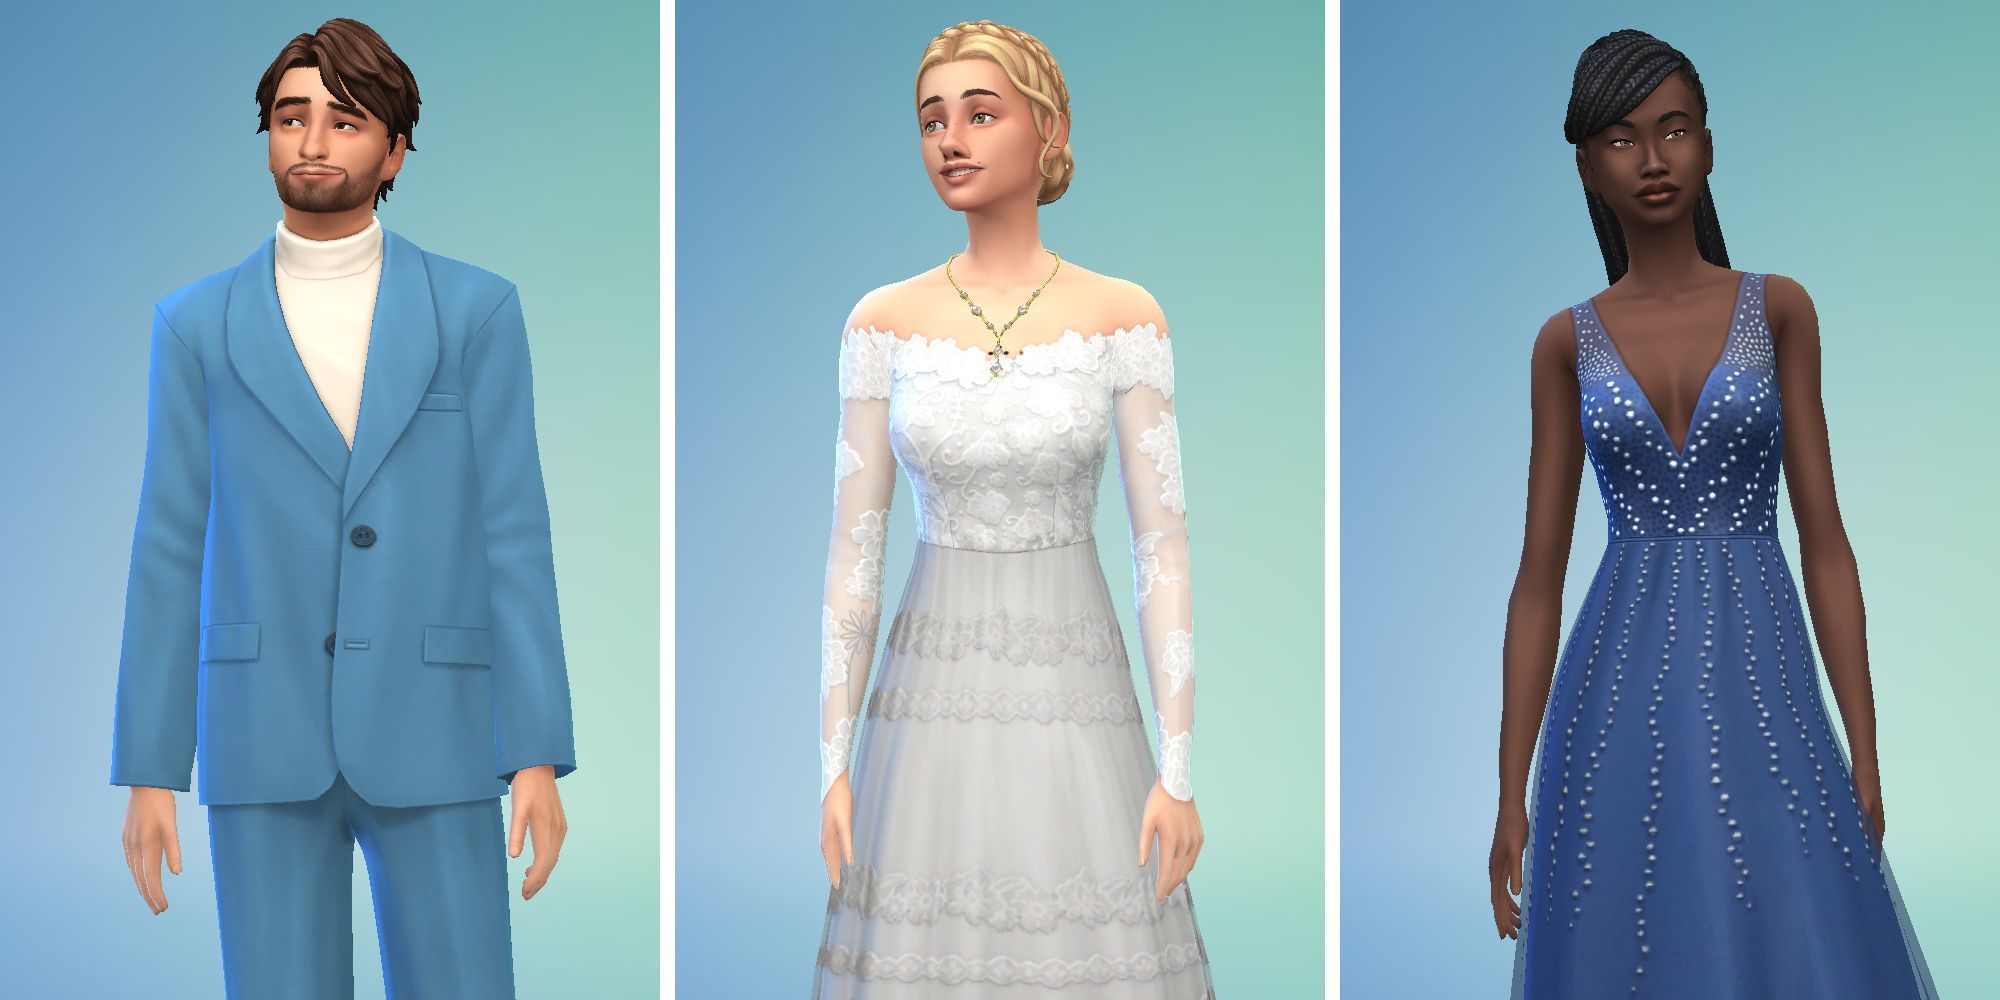 Three images of Sims in Sims 4 Create A Sim. One is a blue suit, one is a wedding dress, and a third in a blue dress